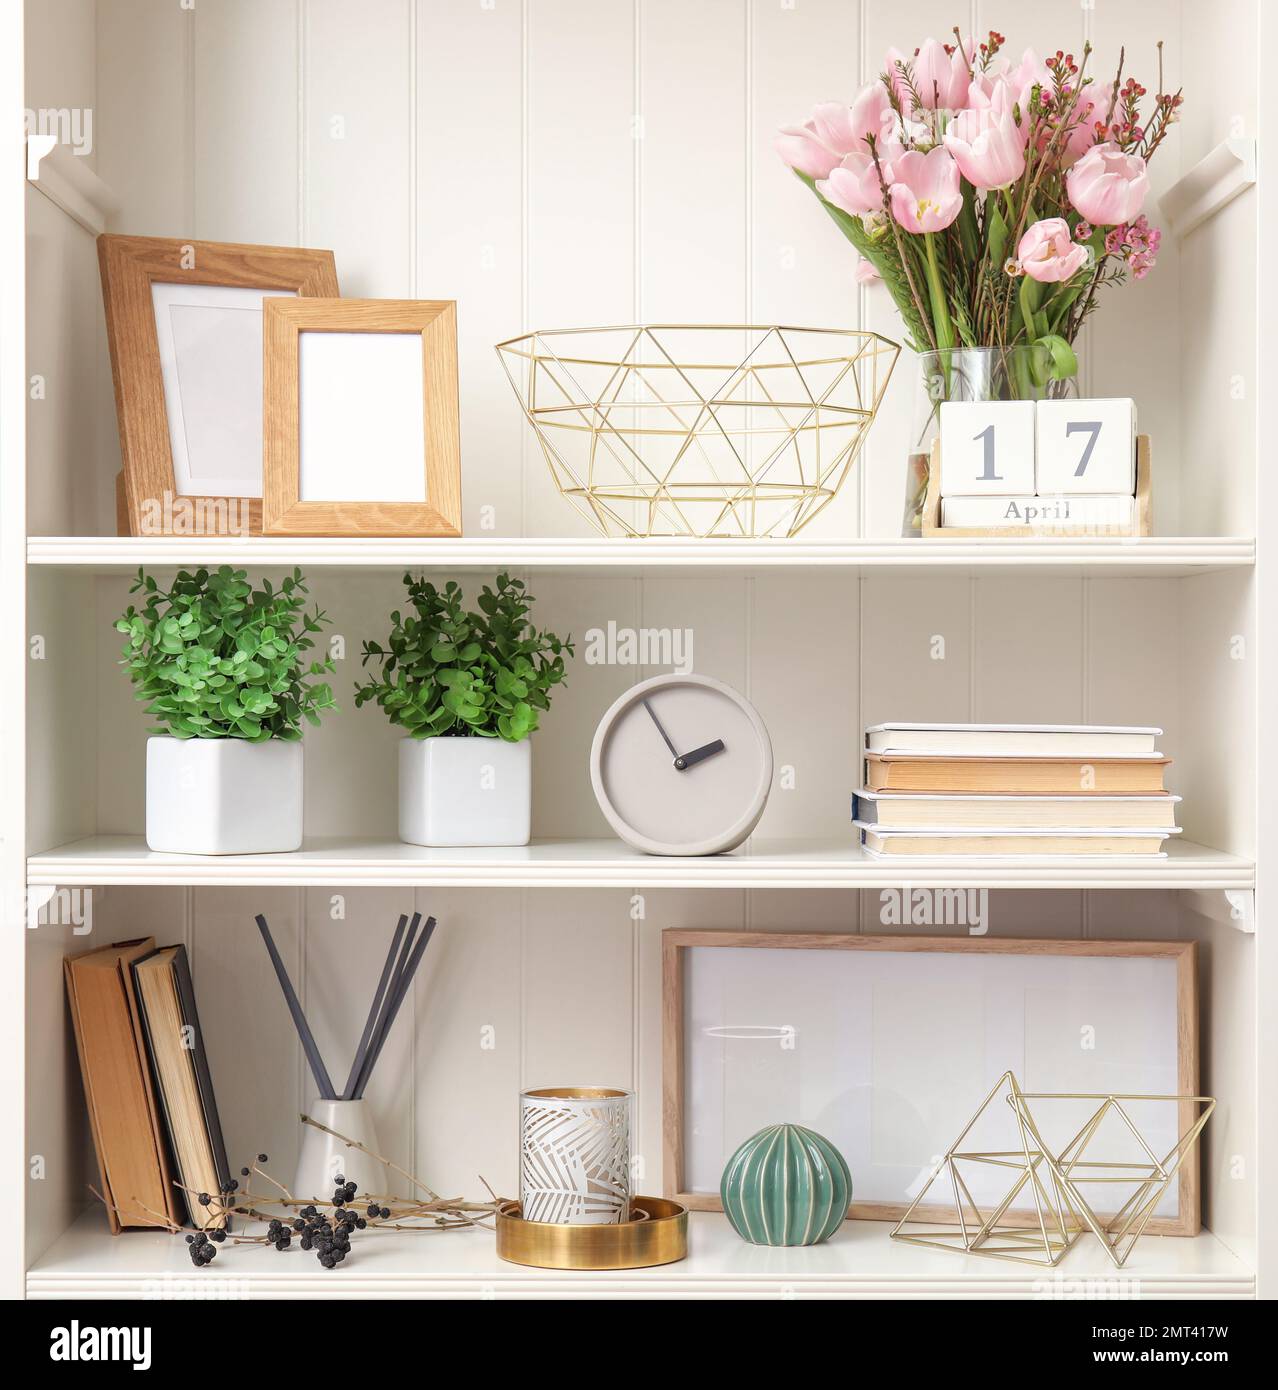 White shelving unit with plants and different decorative stuff Stock Photo